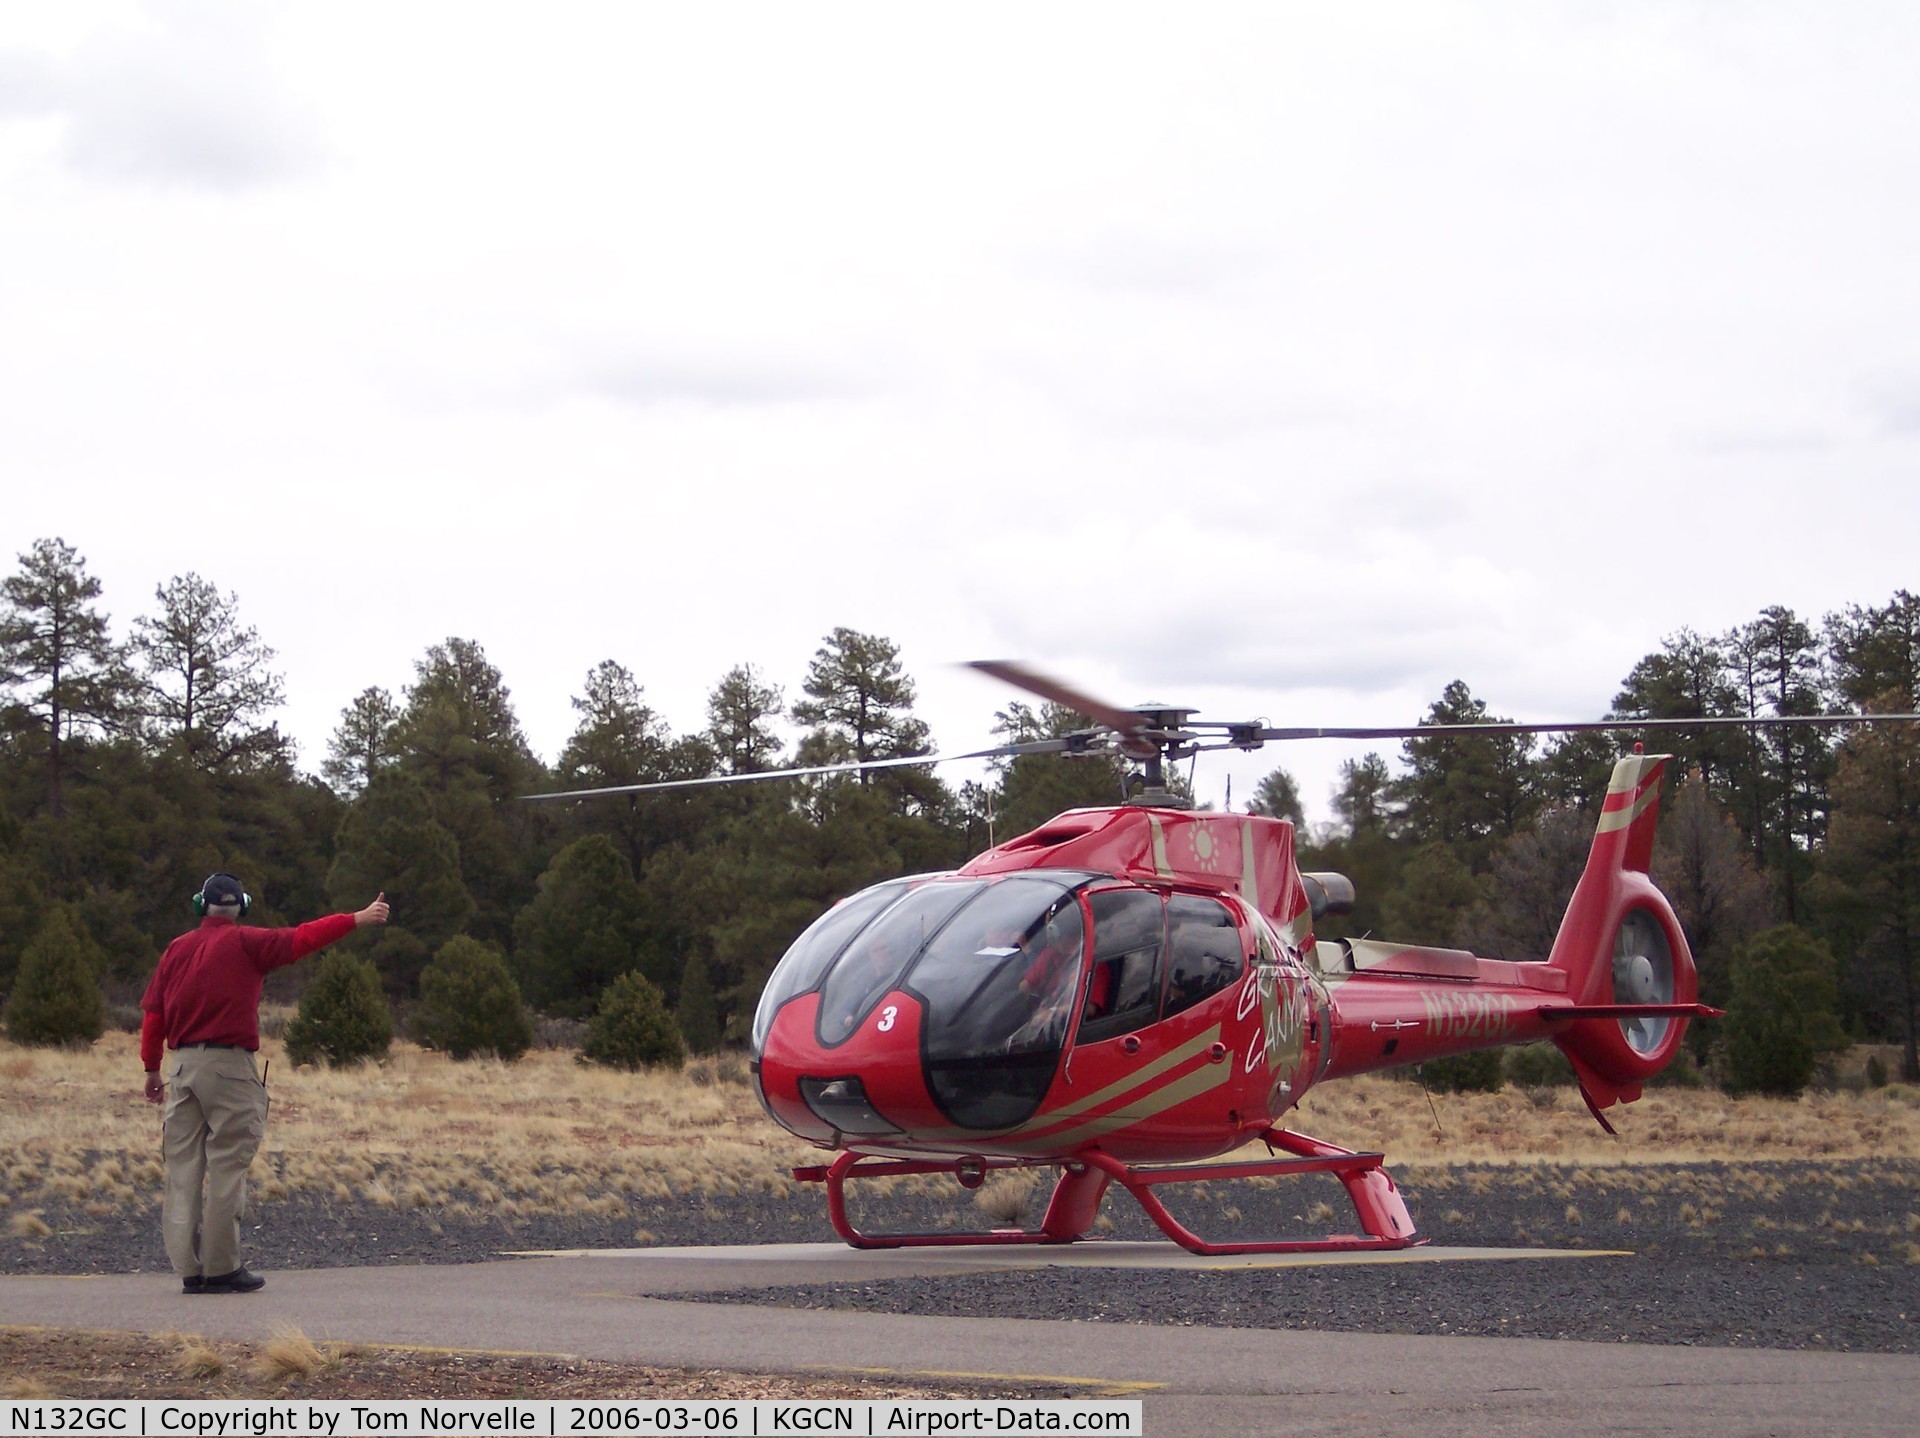 N132GC, 2003 Eurocopter EC-130B-4 (AS-350B-4) C/N 3756, Cleared for takeoff at Grand Canyon Helicopters